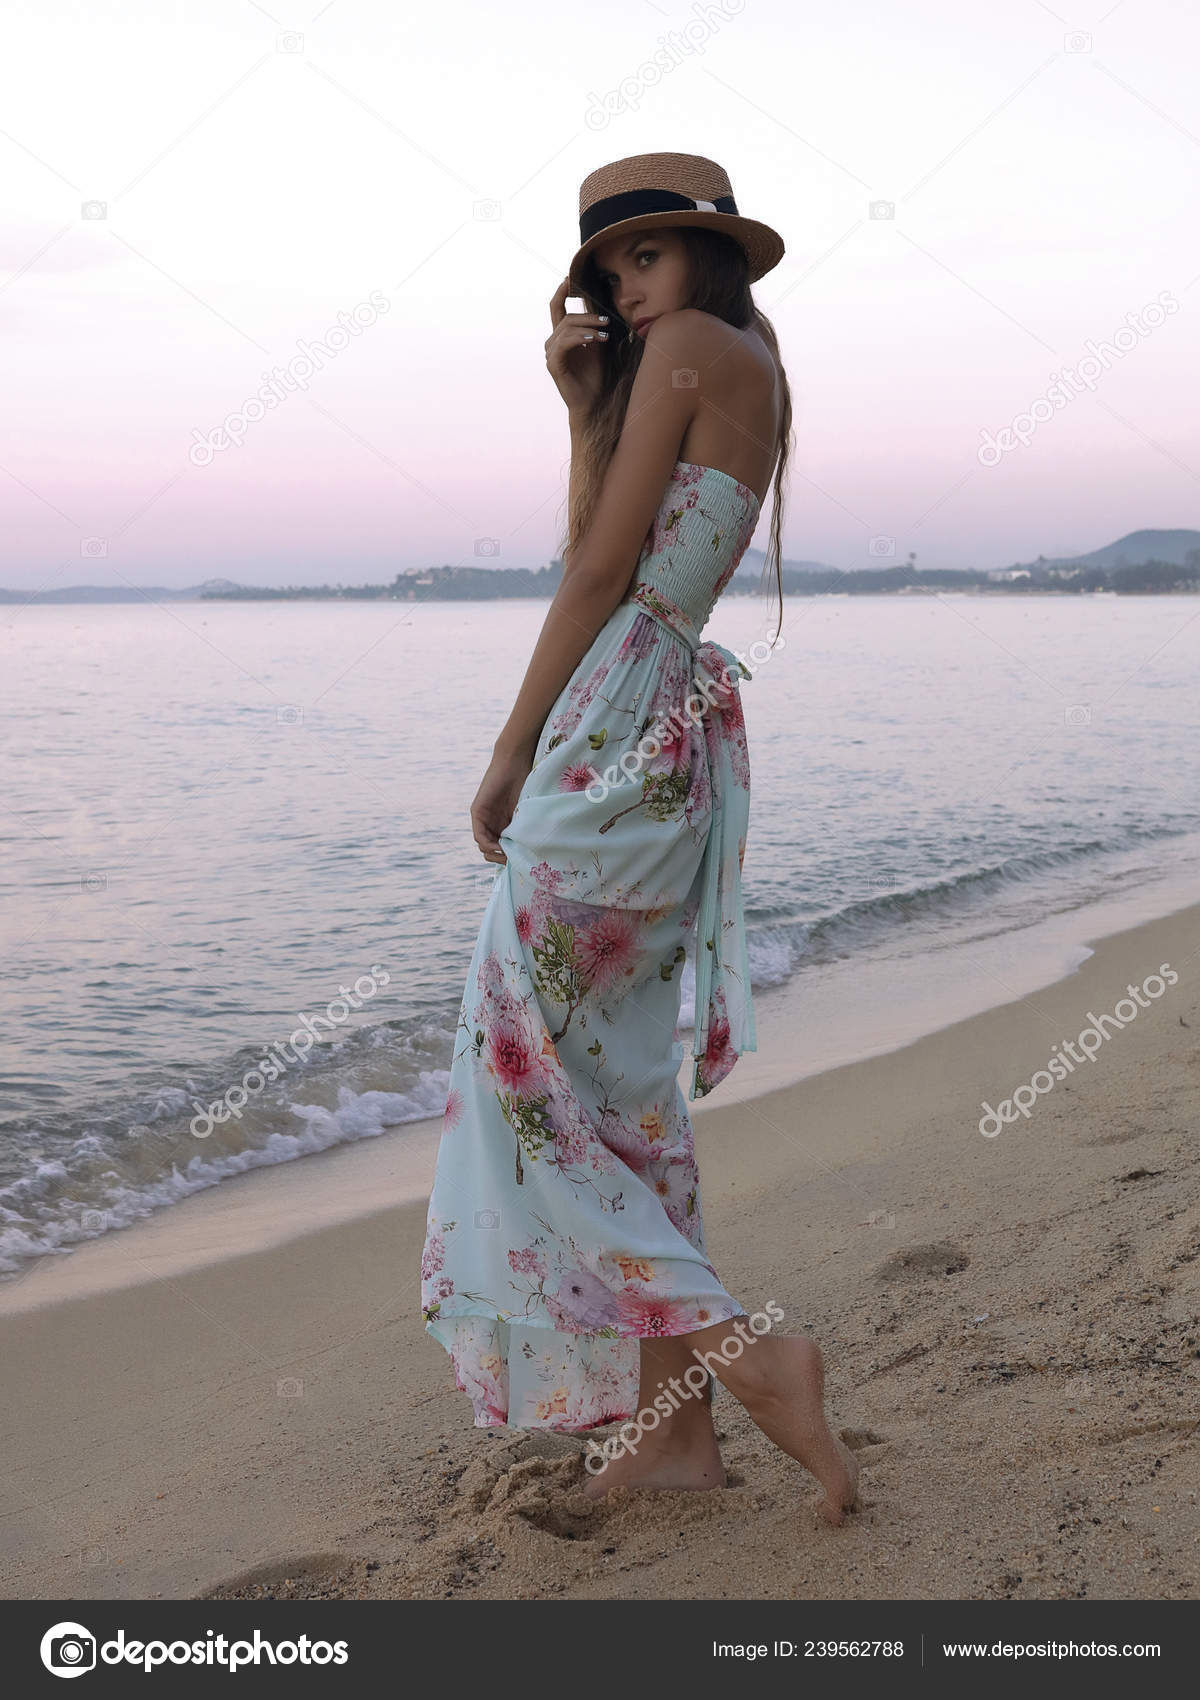 Elegant Young Caucasian Female Model Posing at the Beach in a Beautiful  Yellow Dress with Floral Patterns Stock Image - Image of beautiful, dress:  195109731